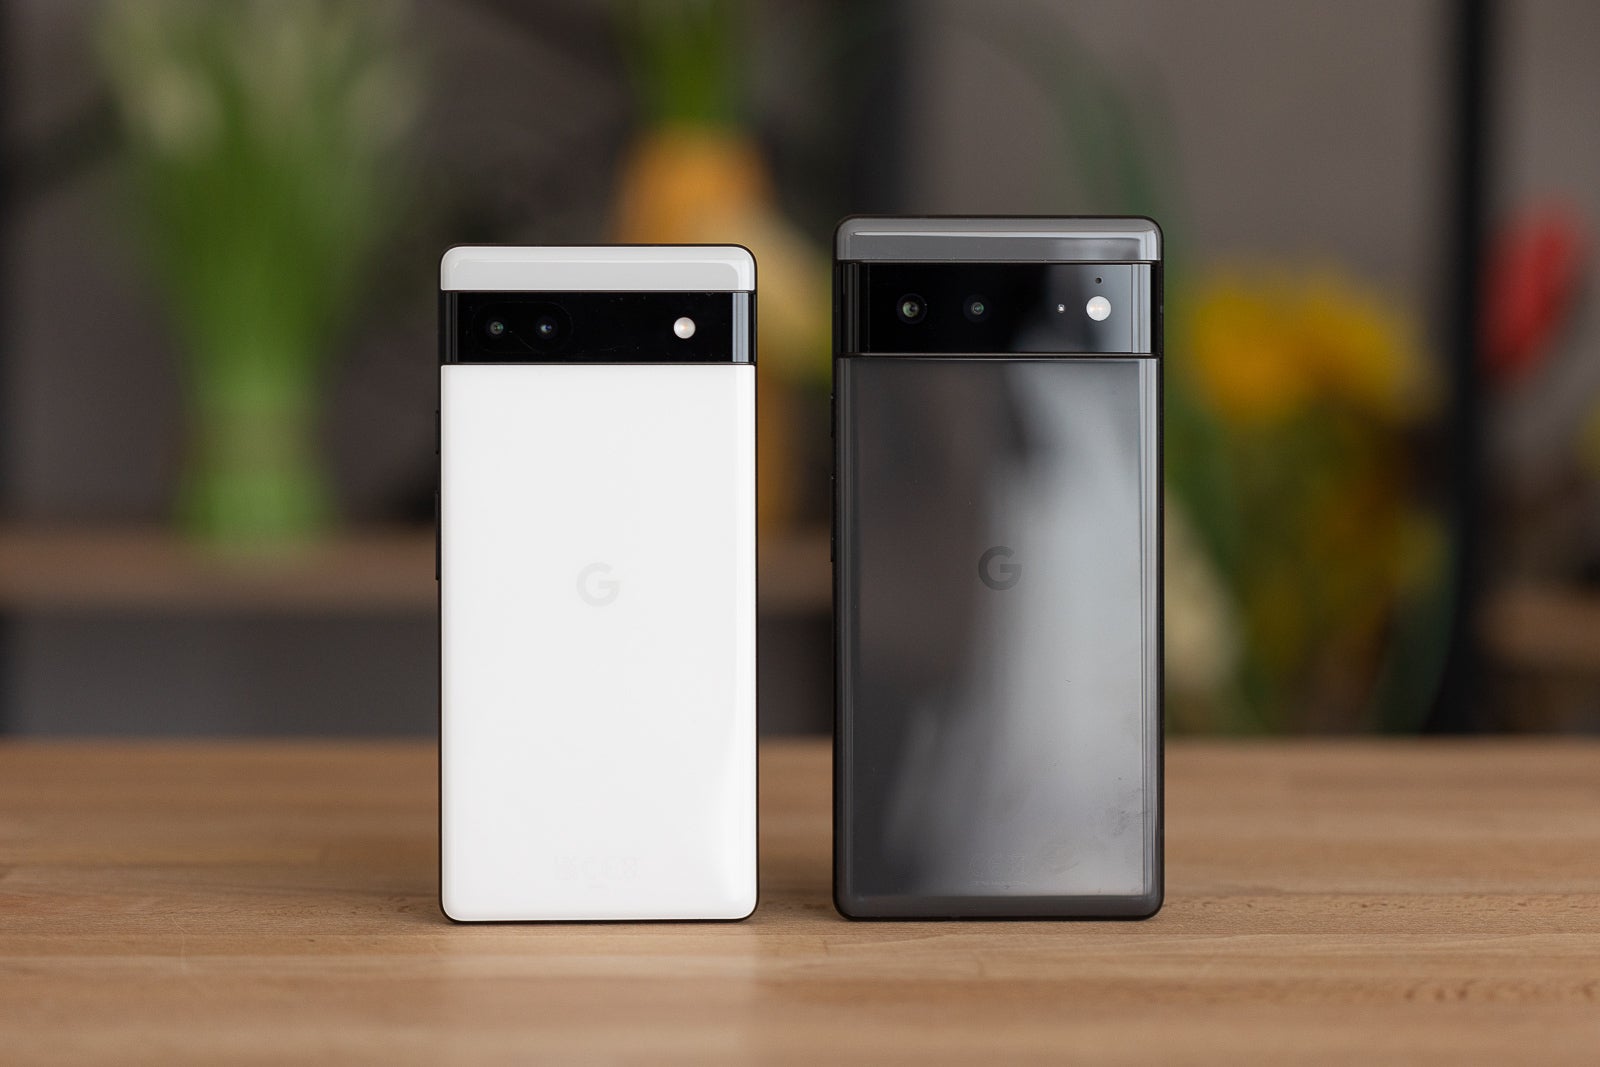 The Pixel 6a (left) and Pixel 6 (right) - Google Pixel 6a vs Pixel 6: key differences